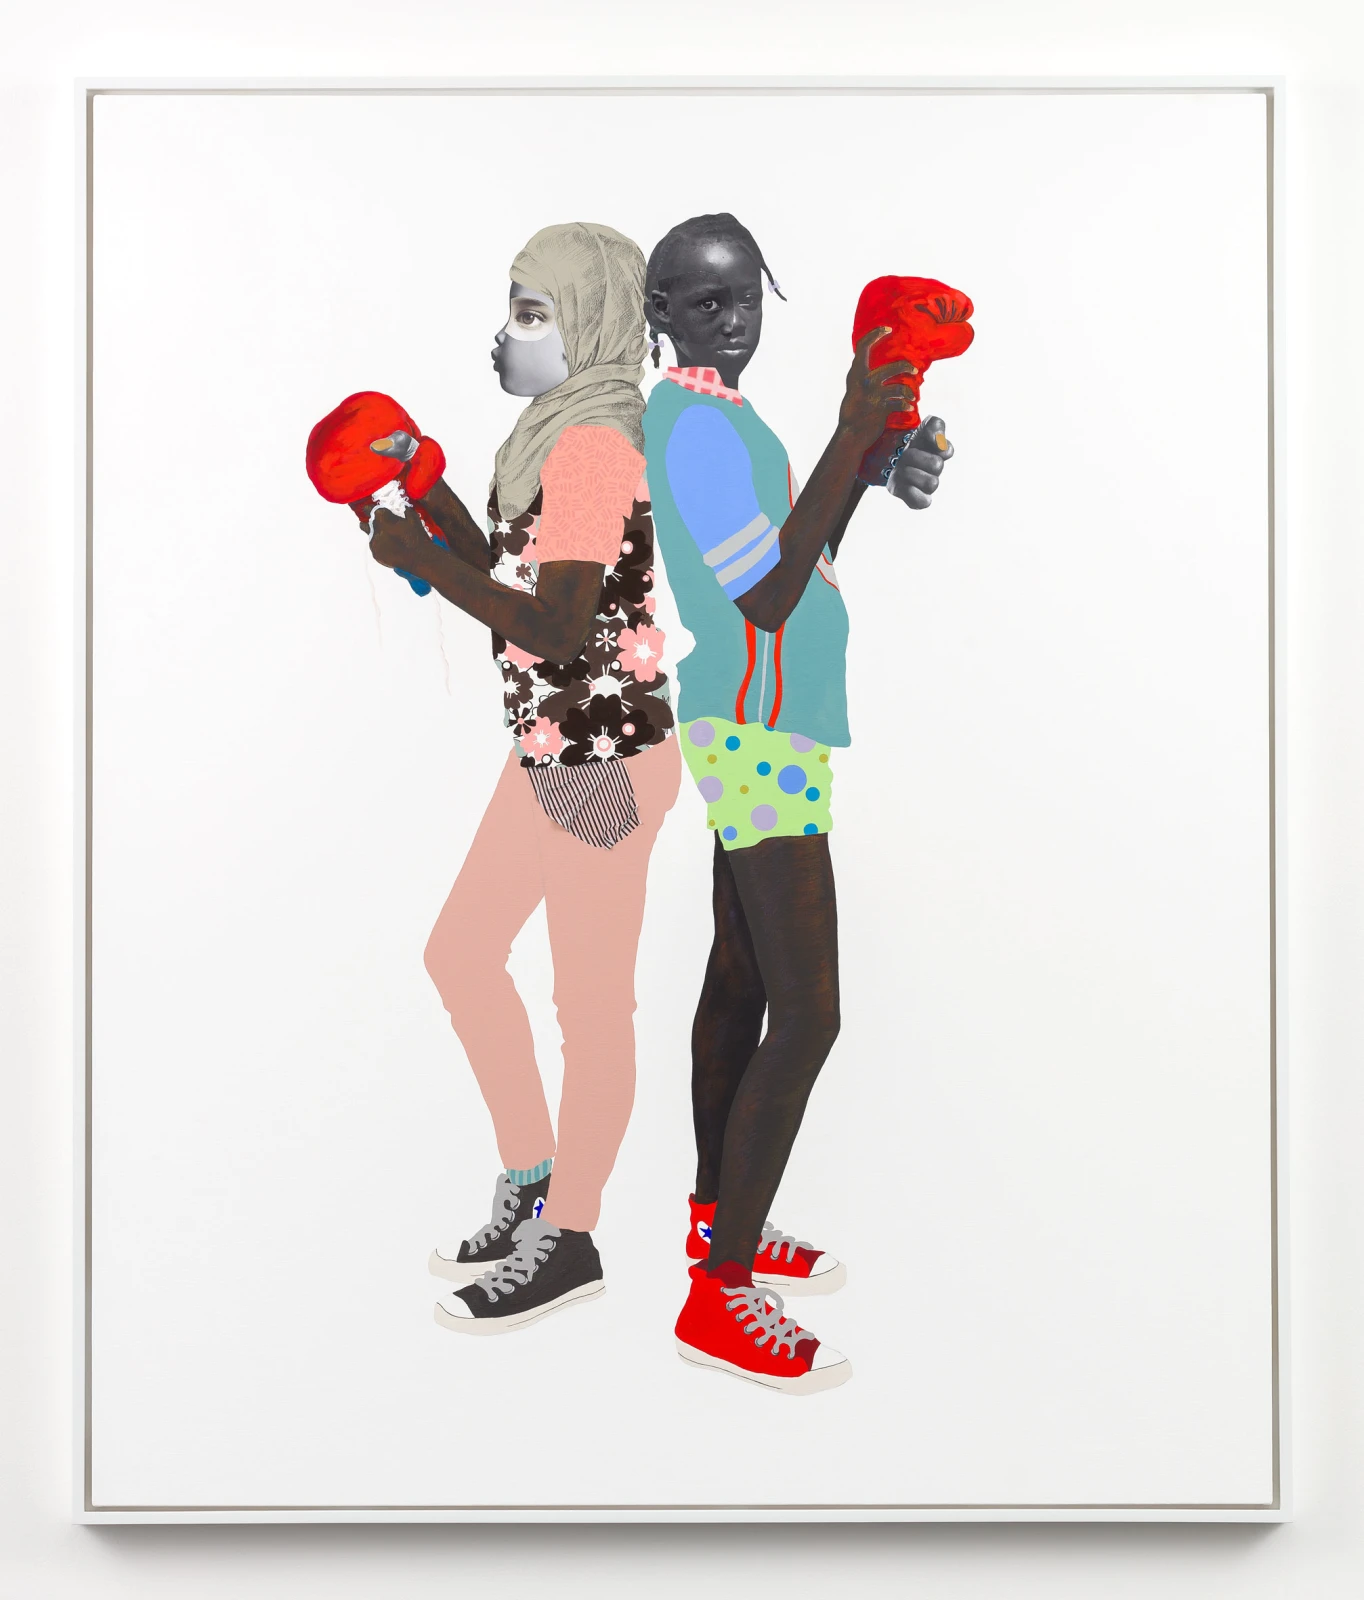 <div class="artist">Deborah Roberts, 'Red, white and blue', 2018, Collection of SFMOMA, San Francisco, CA.</div>